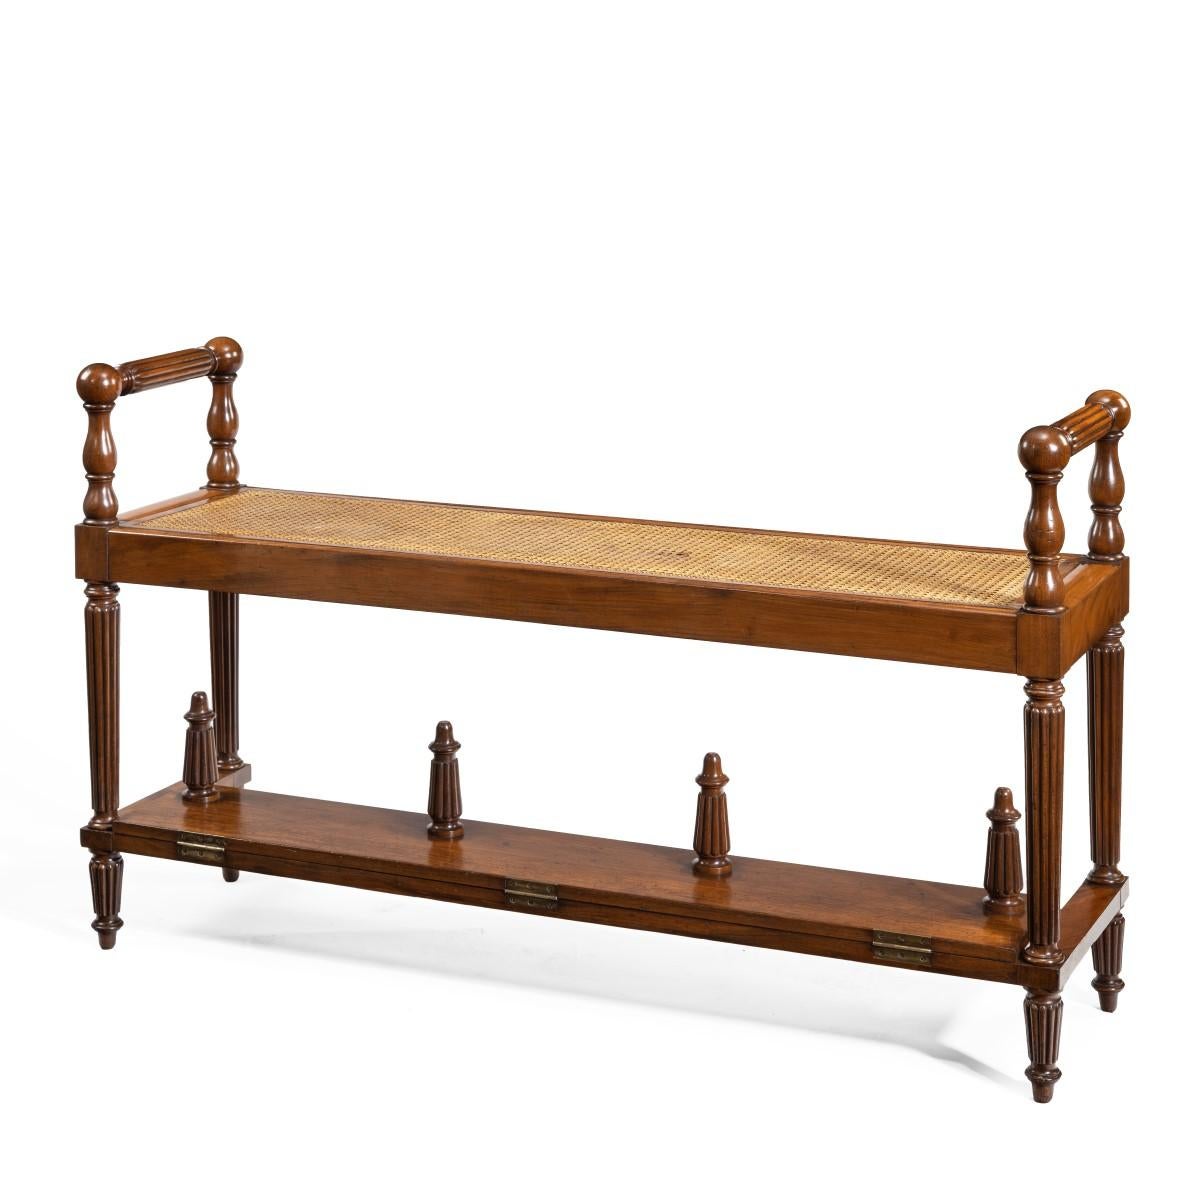 Mid-19th Century Louis Philippe Mahogany Hall Bench with a Folding Foot-Rest For Sale